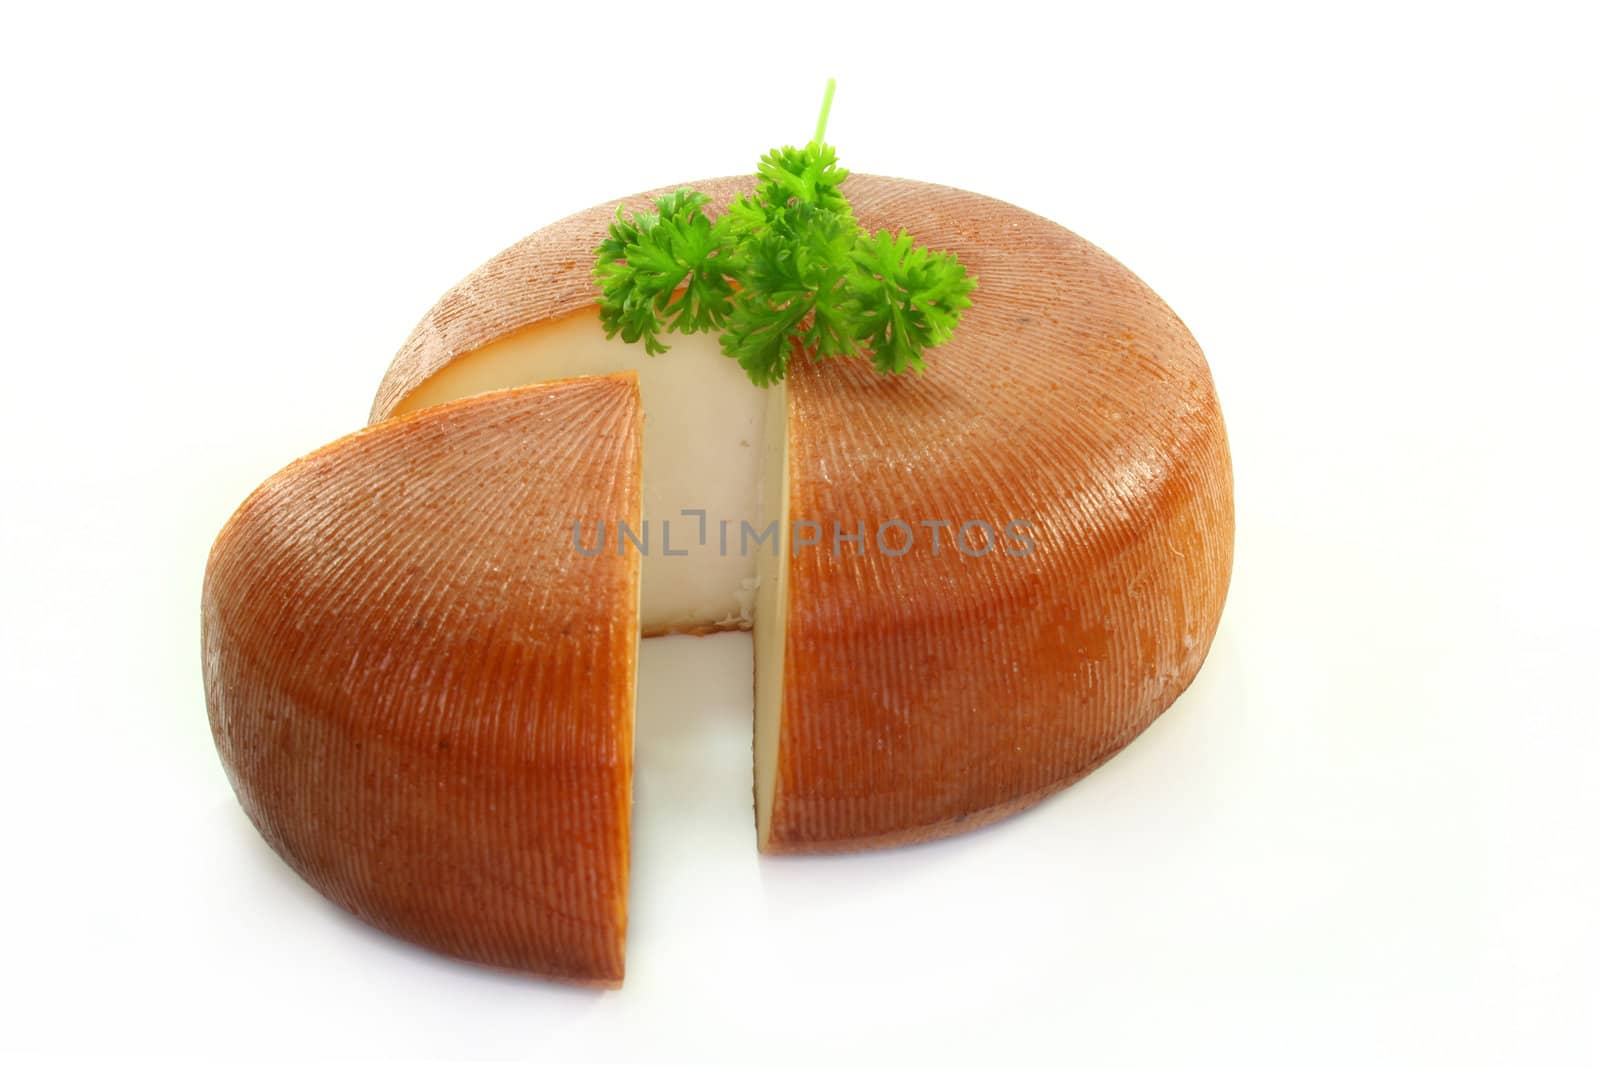 a loaf of smoked goat cheese on a white background